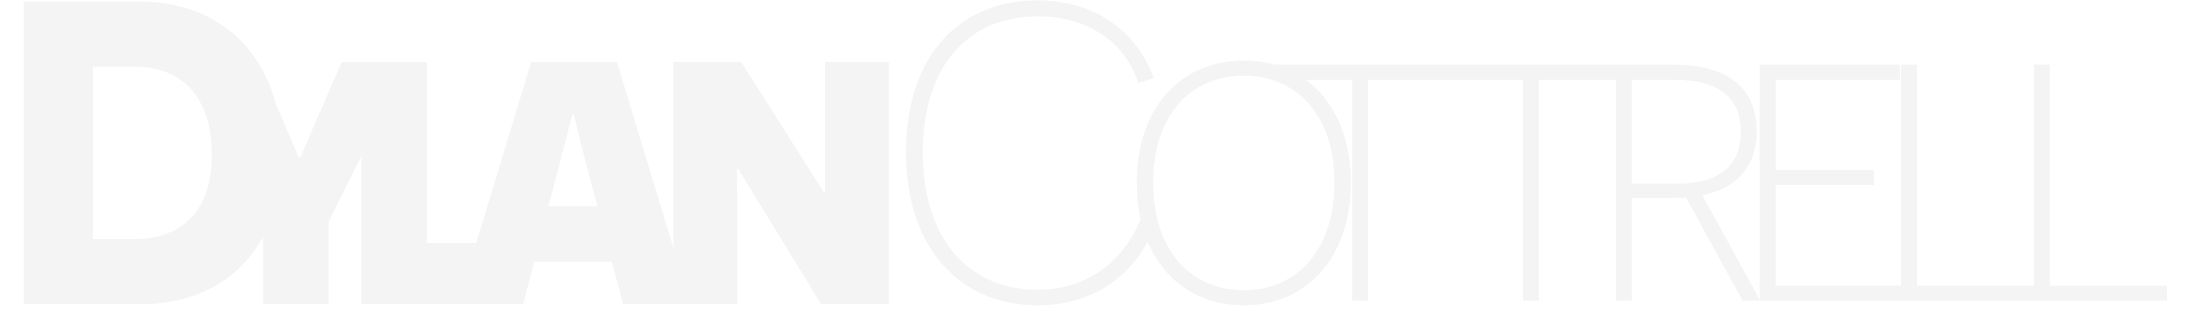 A Logo of DylanCottrell in white.
